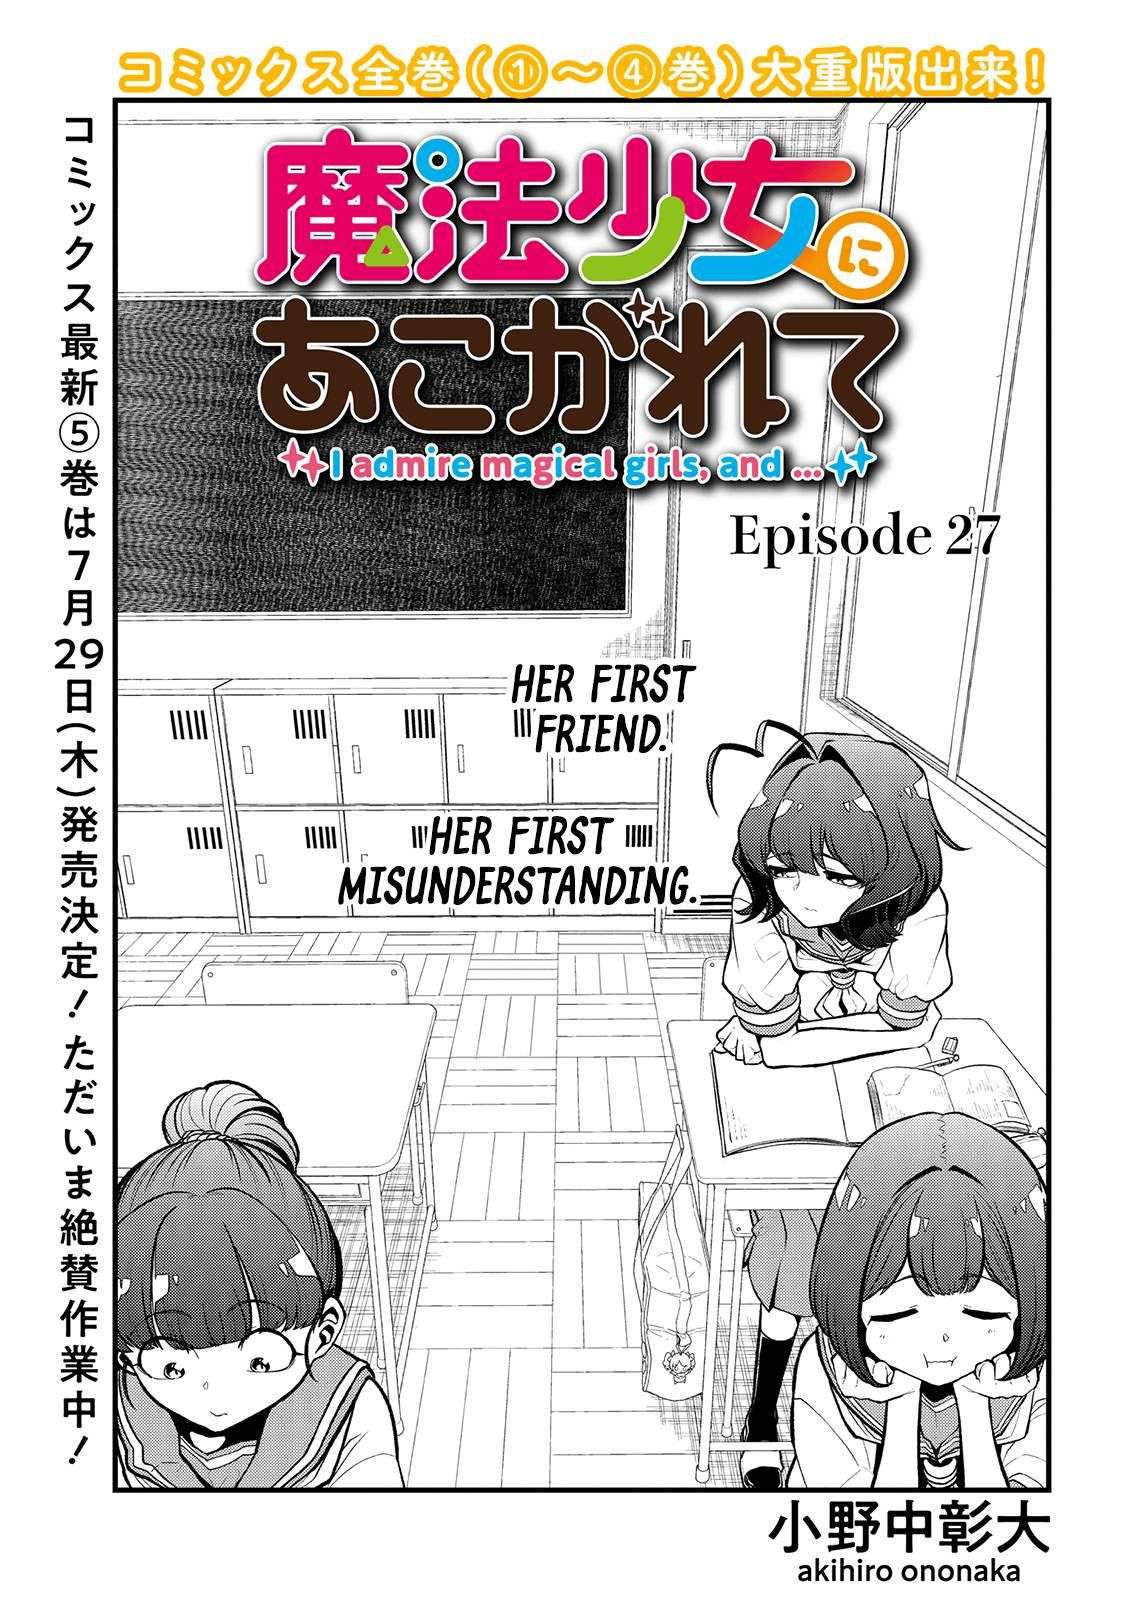 Gushing over Magical Girls - chapter 27 - #3